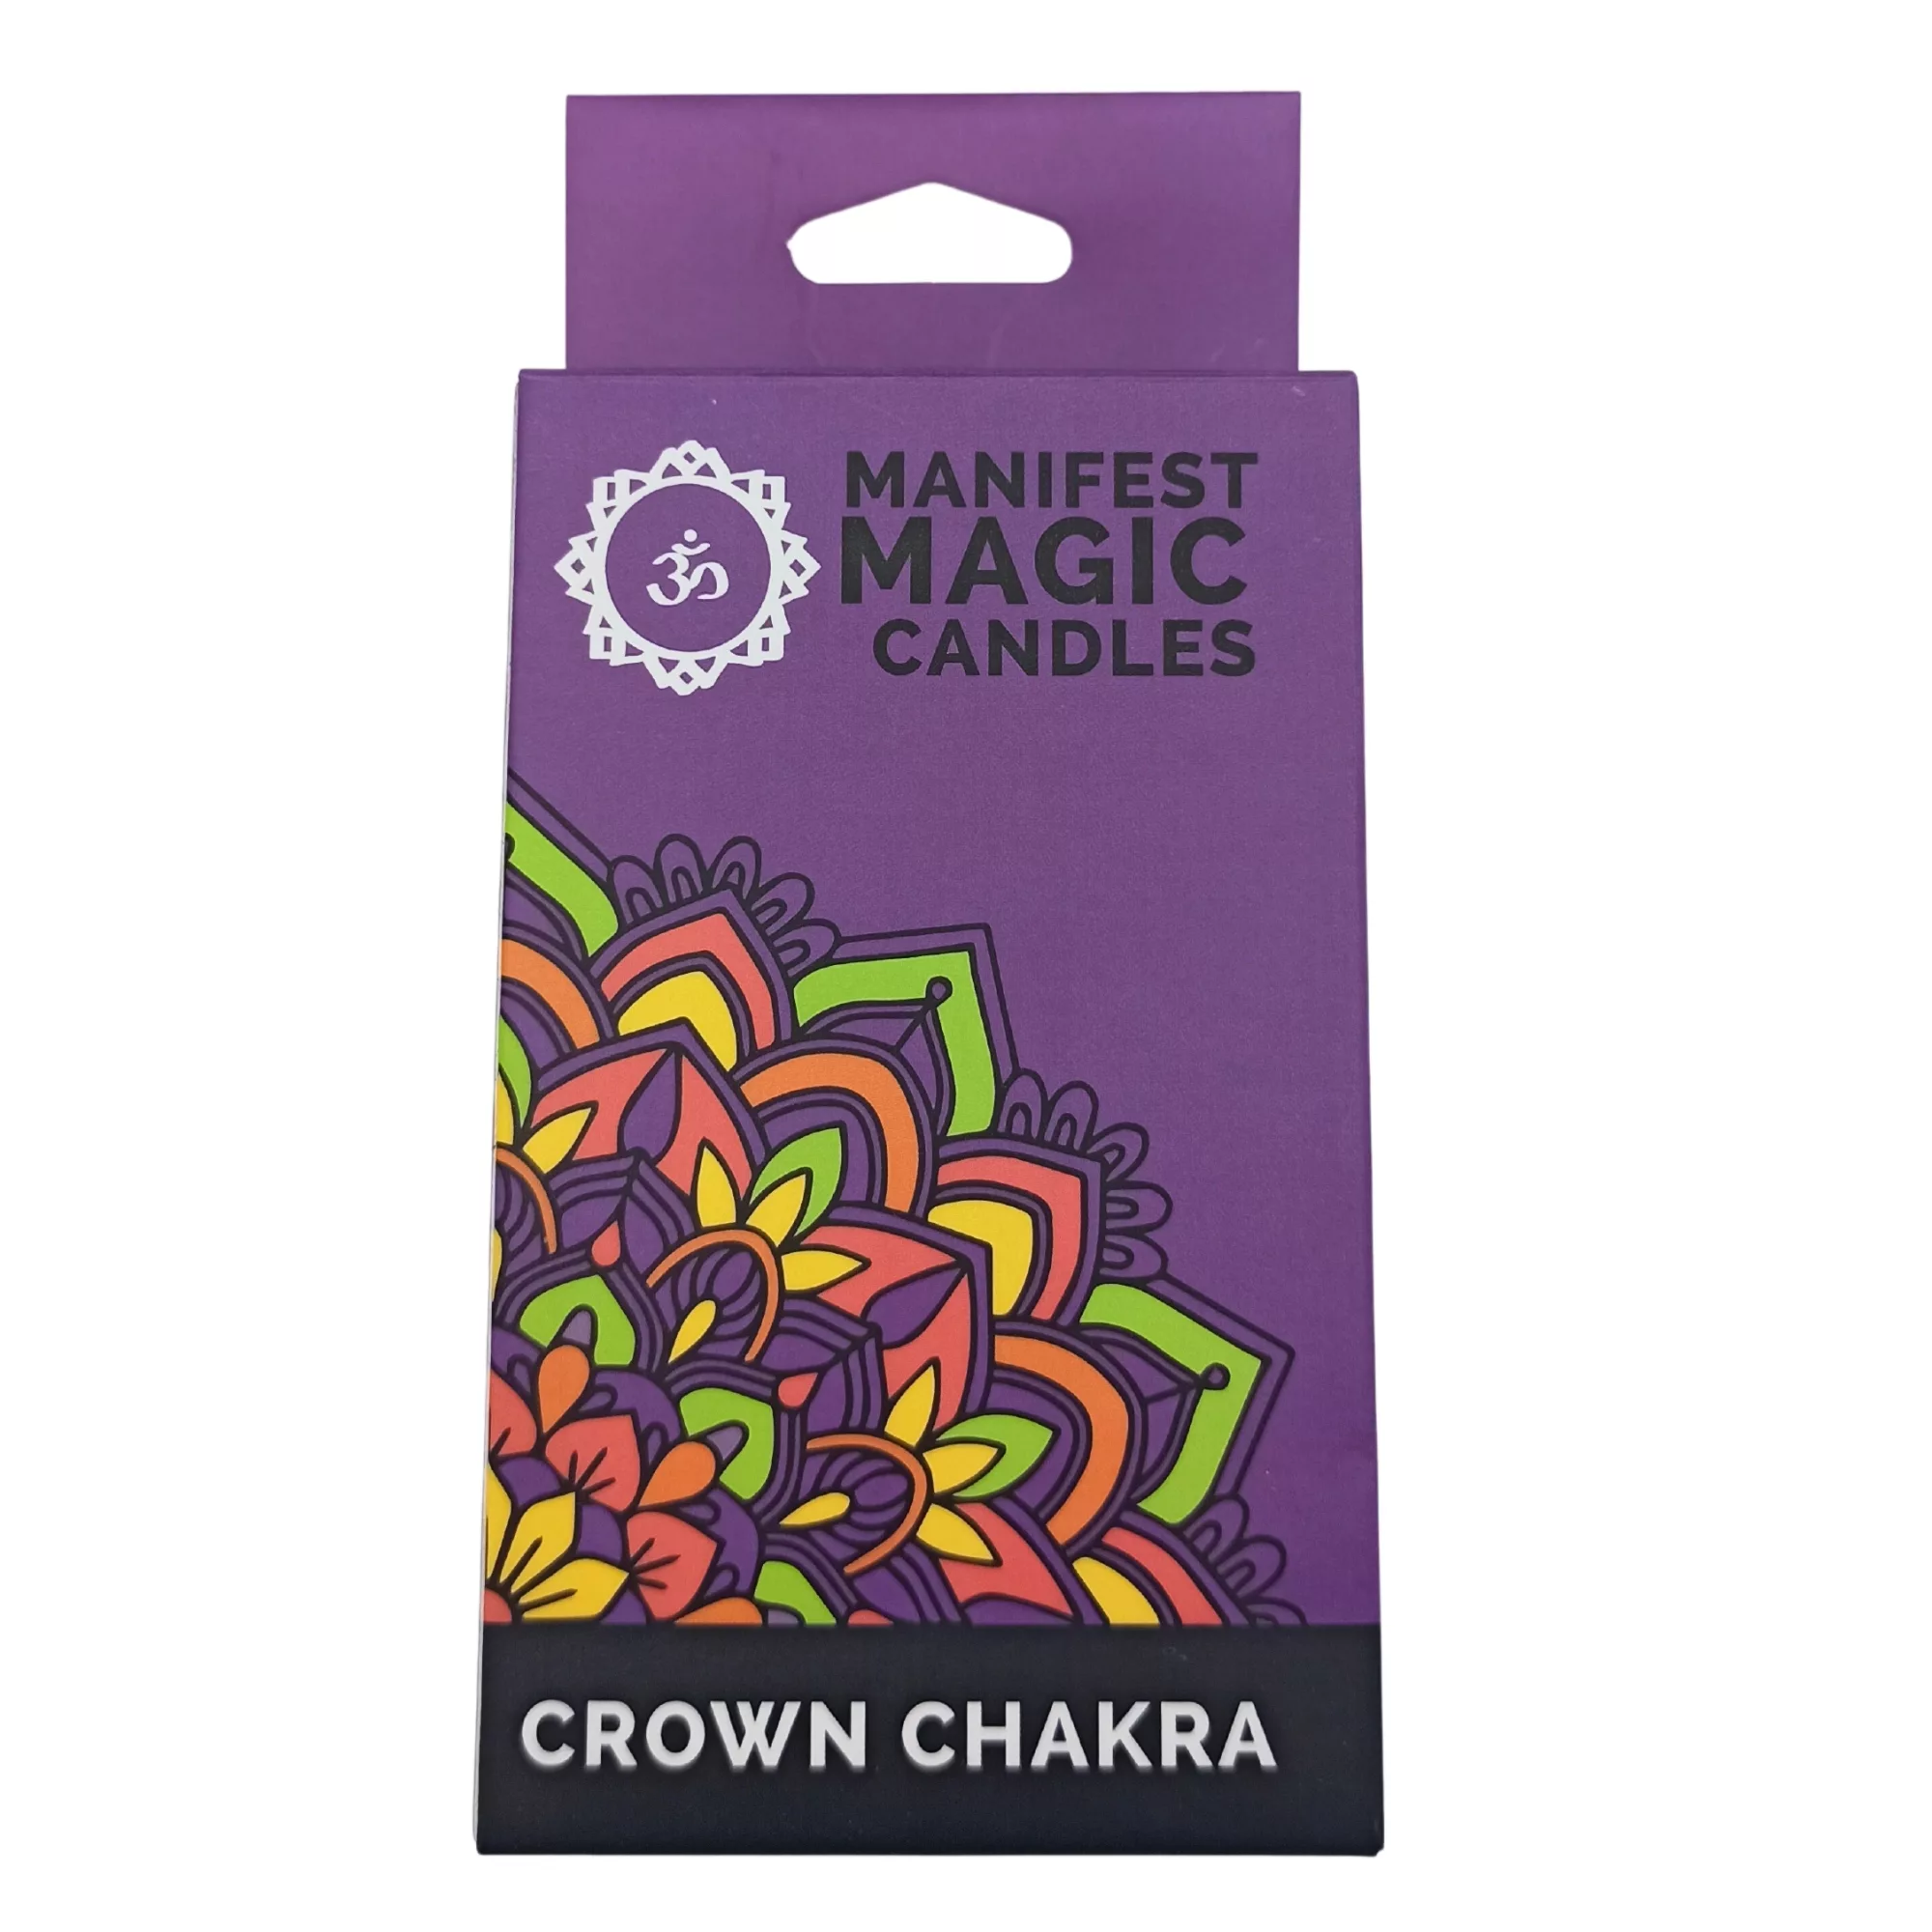 Manifest Magic Candles (pack of 12) – Violet – Crown Chakra